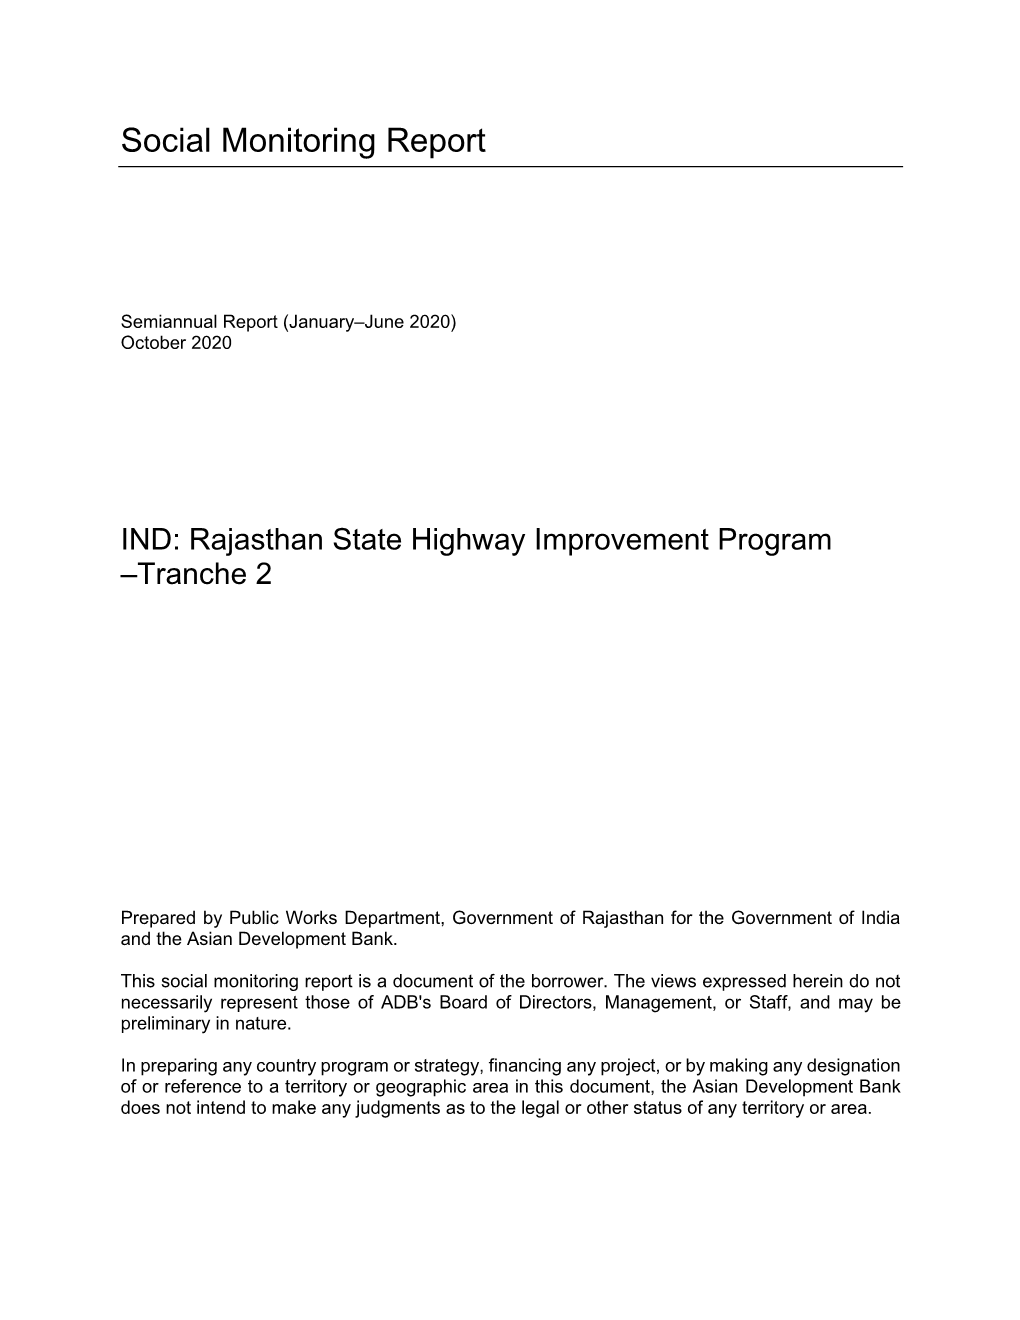 49228-003: Rajasthan State Highway Investment Program Tranche 2